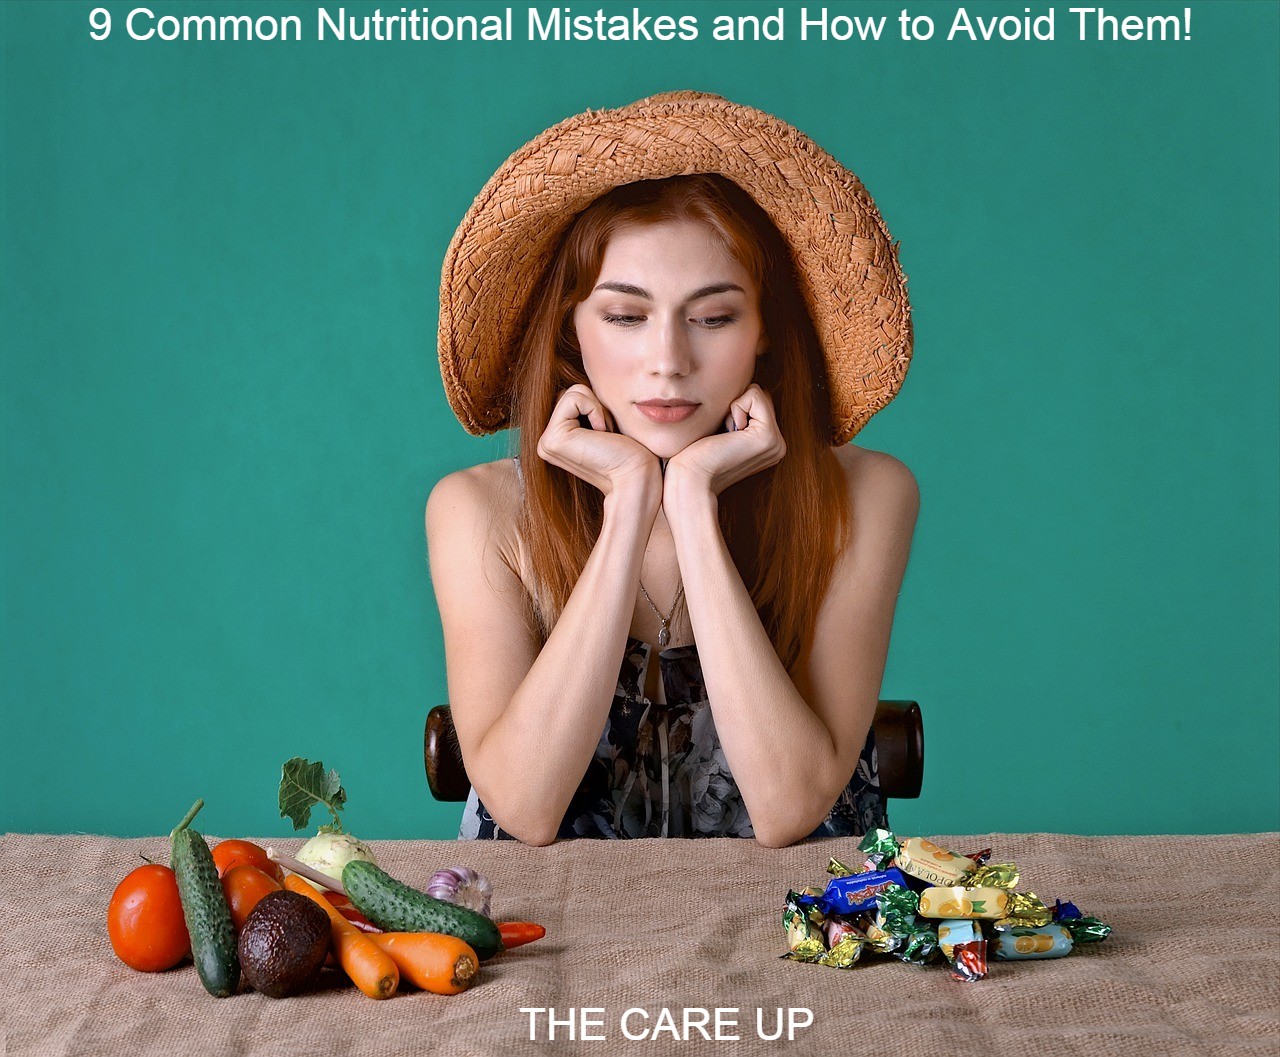 9 Common Nutritional Mistakes and How to Avoid Them!